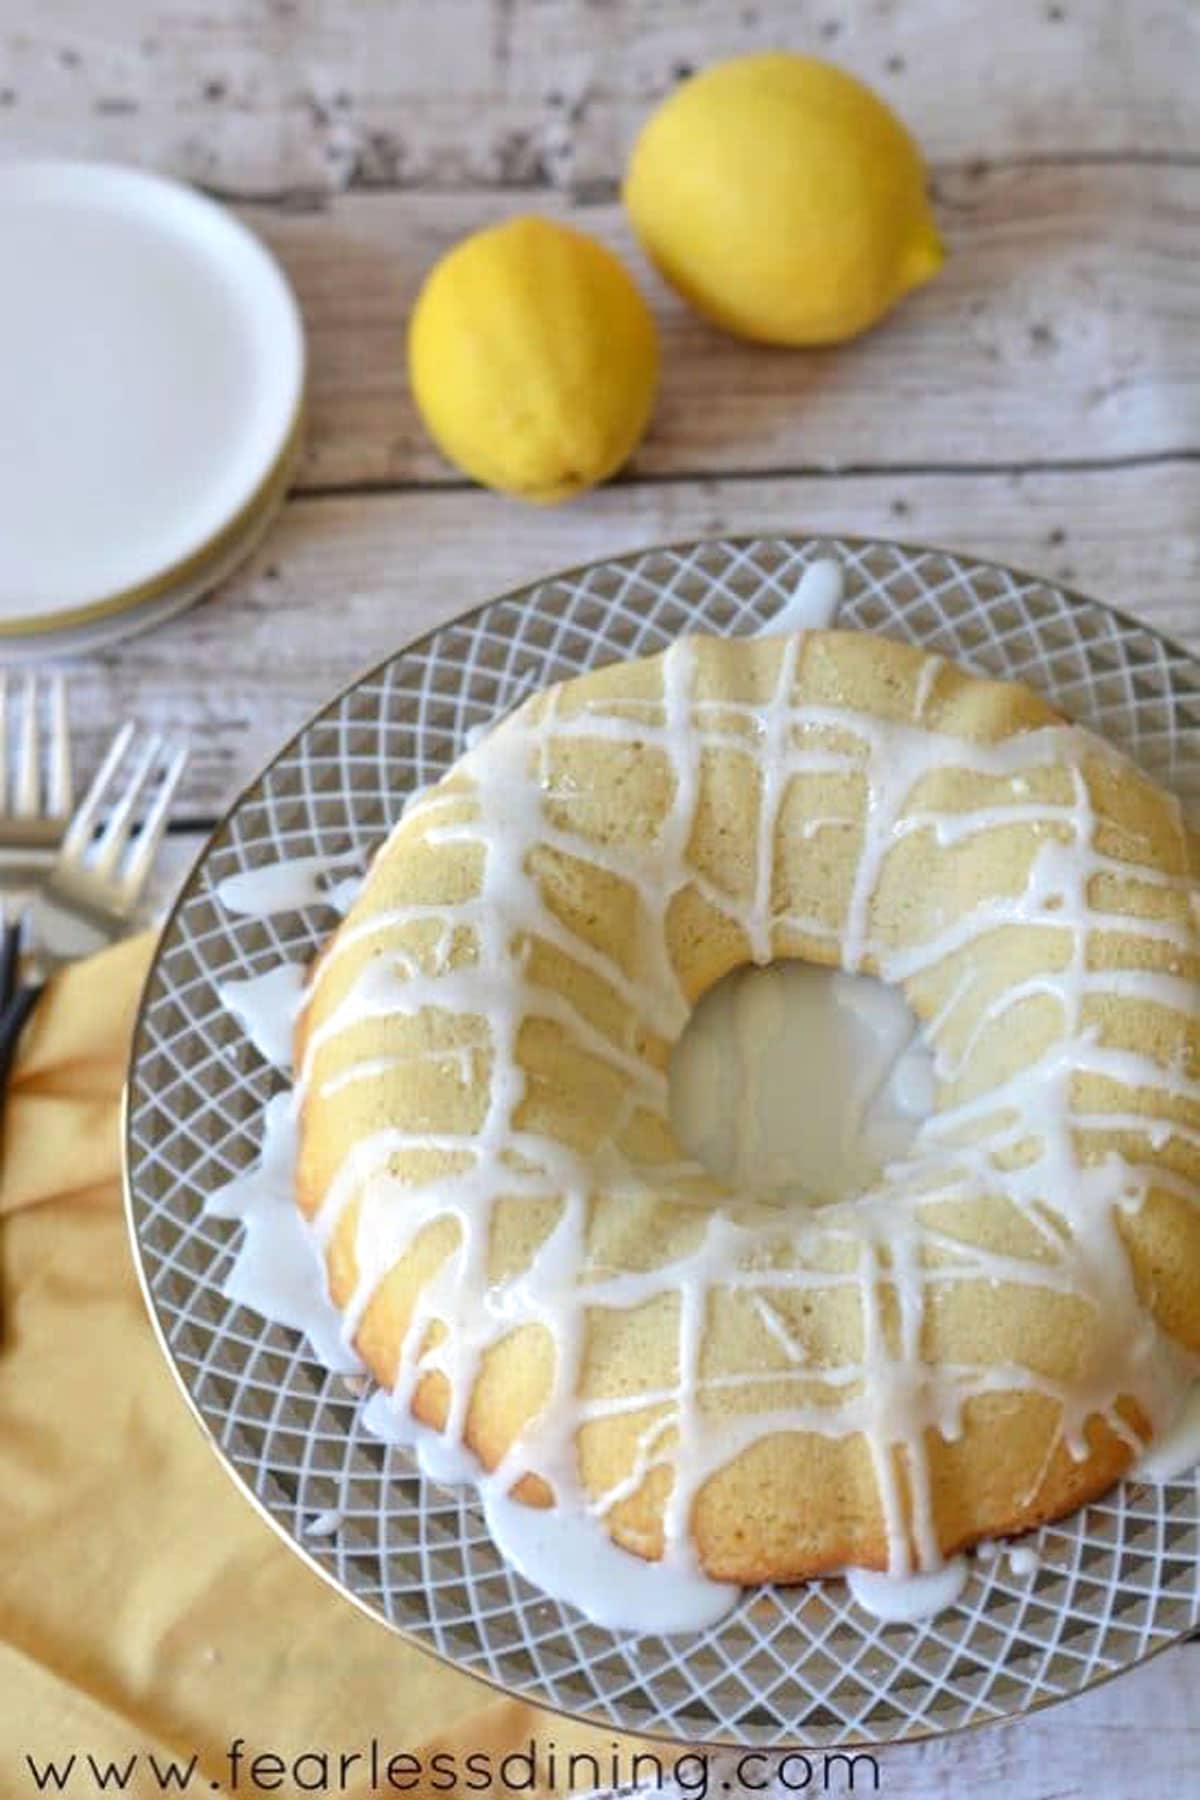 A top view of the lemon bundt cake on a  dessert table.